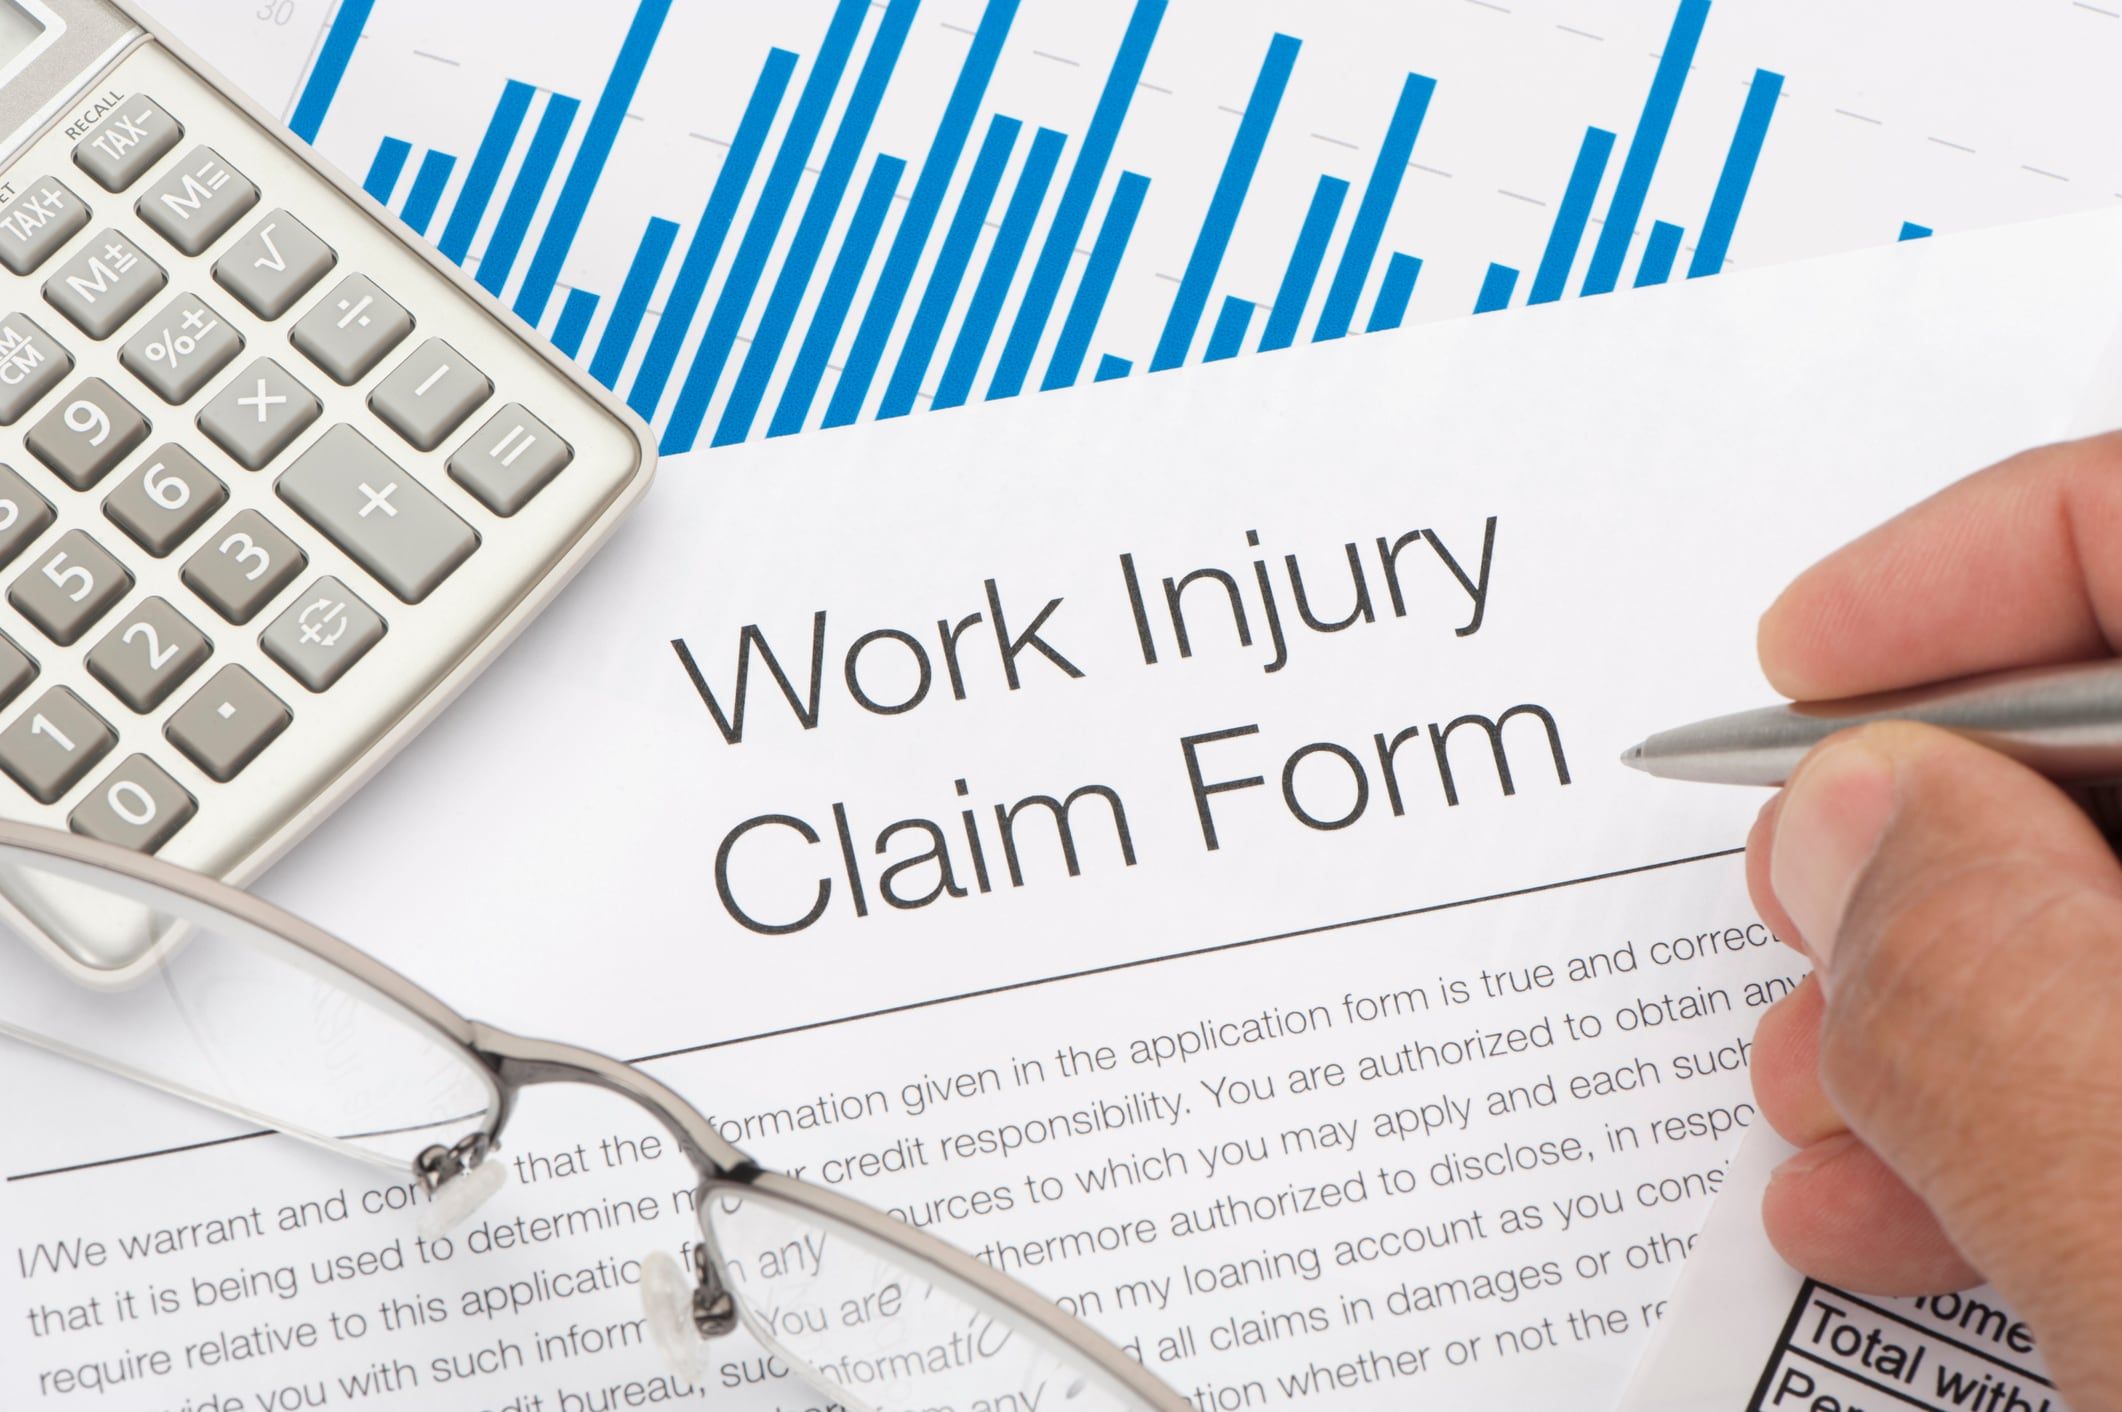 How a workplace injury can uncover misclassification of a caregiver